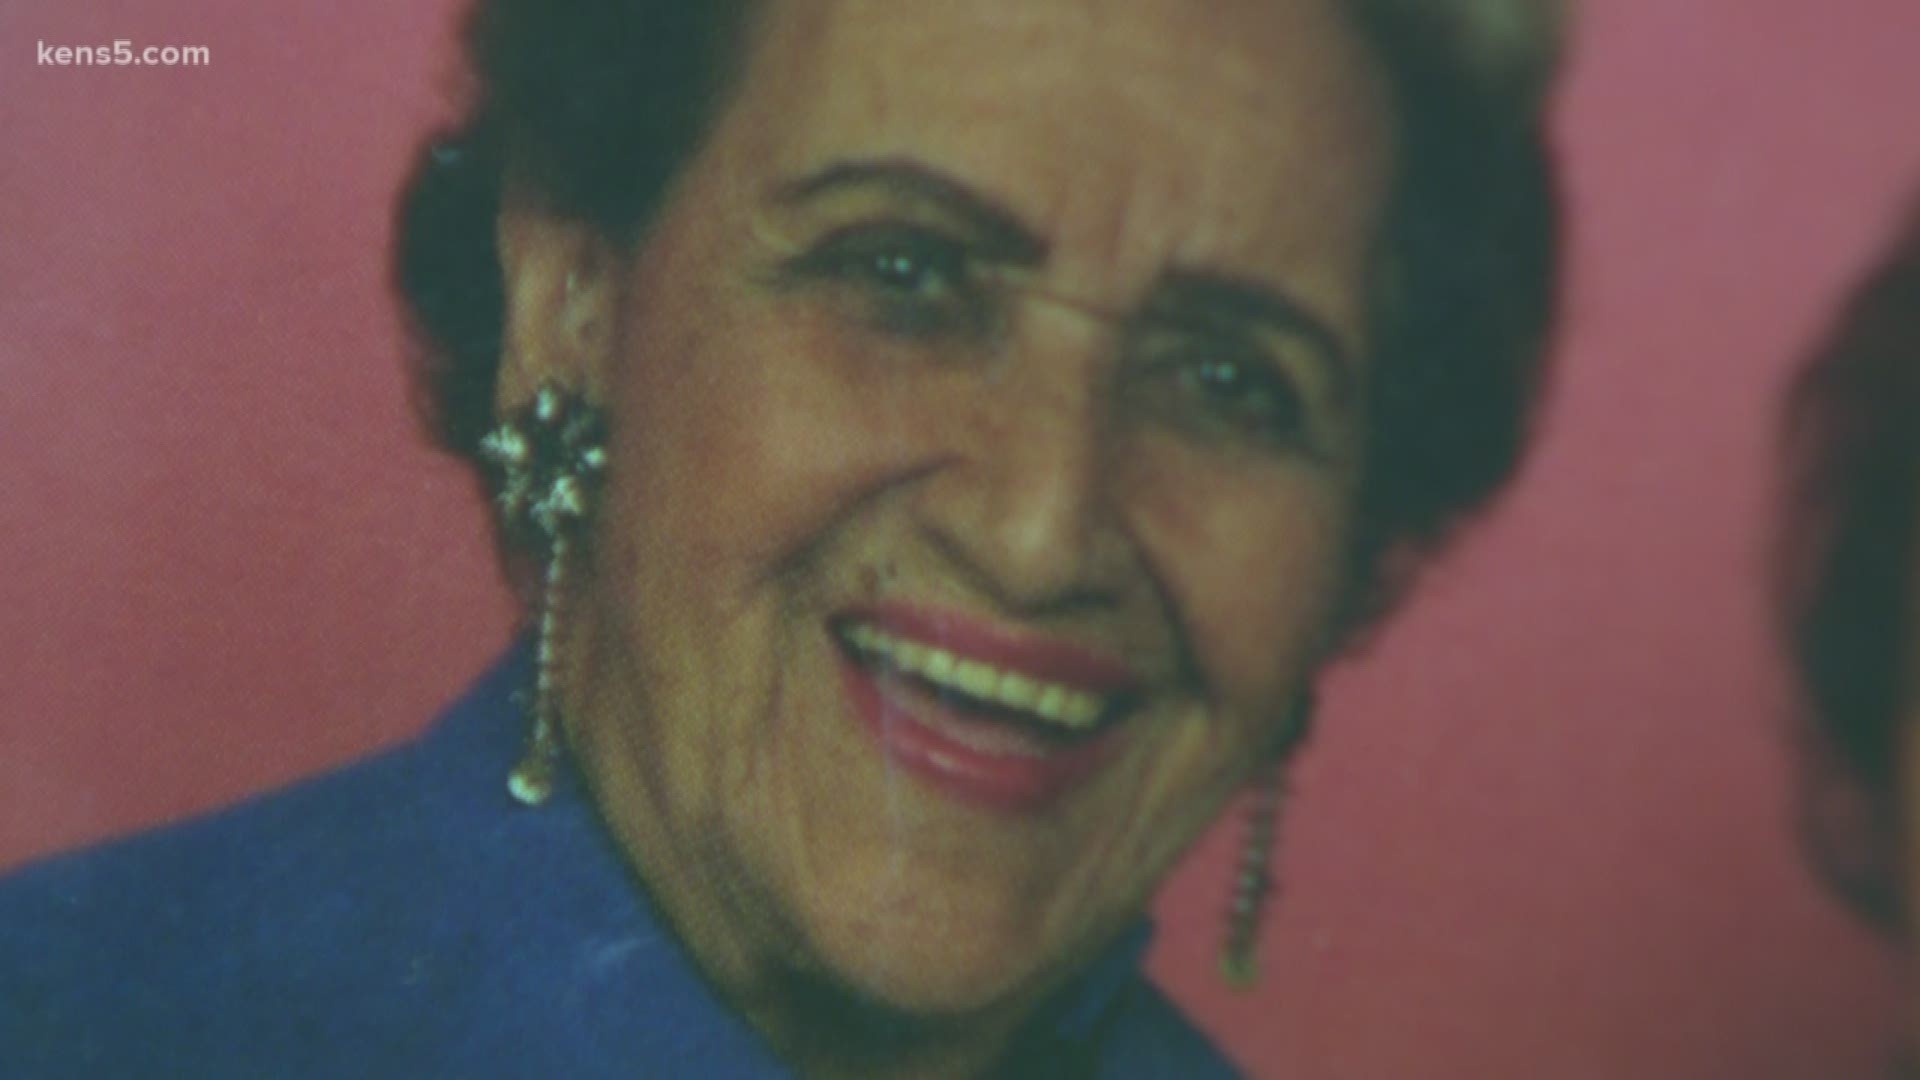 Rita Vidaurri passed away Wednesday night at the age of 94, after a year full of music and performing with other iconic artists. A community remembered her on Thursday.